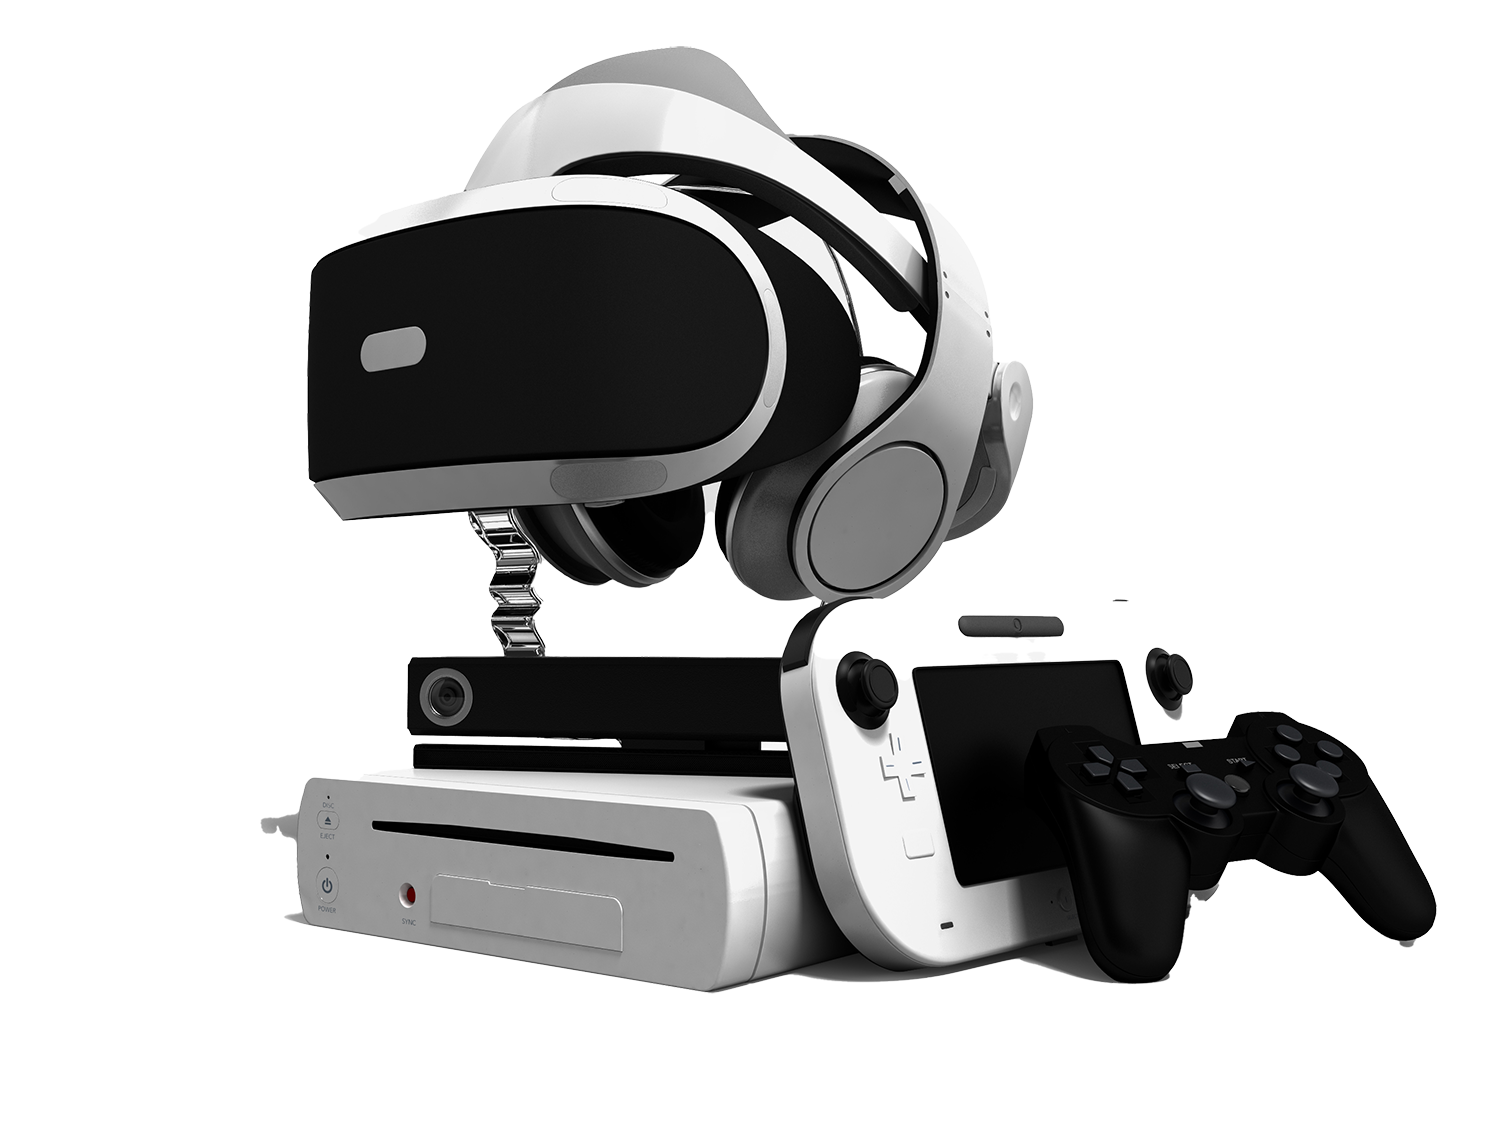 VR headset with gaming console and controller.